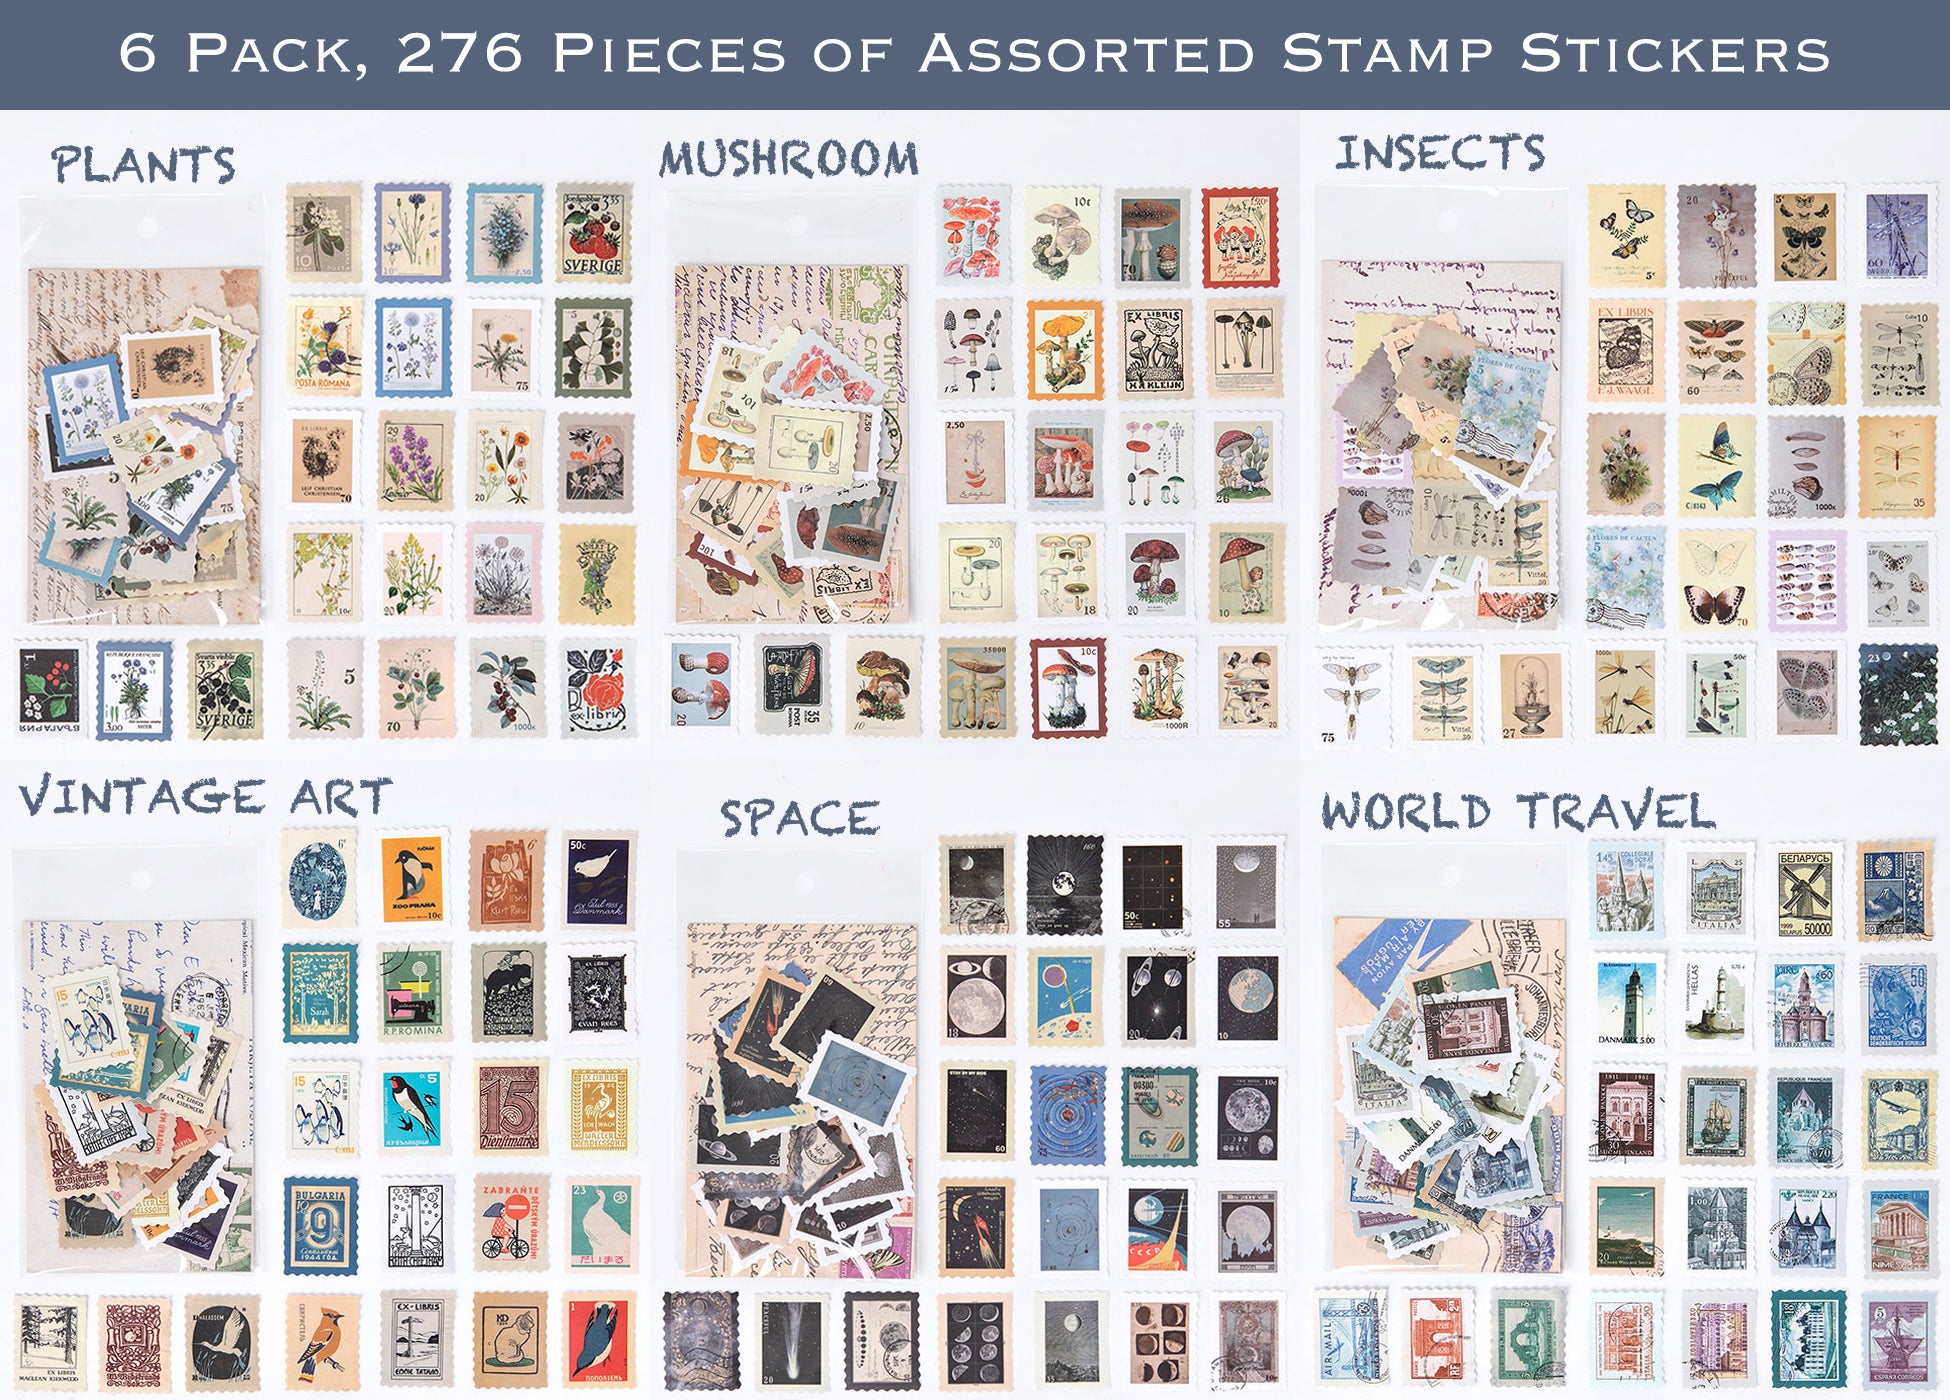 OIIKI 184 Pcs Vintage Fake Postage Stamp Stickers Set, Animals Plant  Assorted Designs Stamp Shape Decorative Stickers for Journaling  Scrapbooking